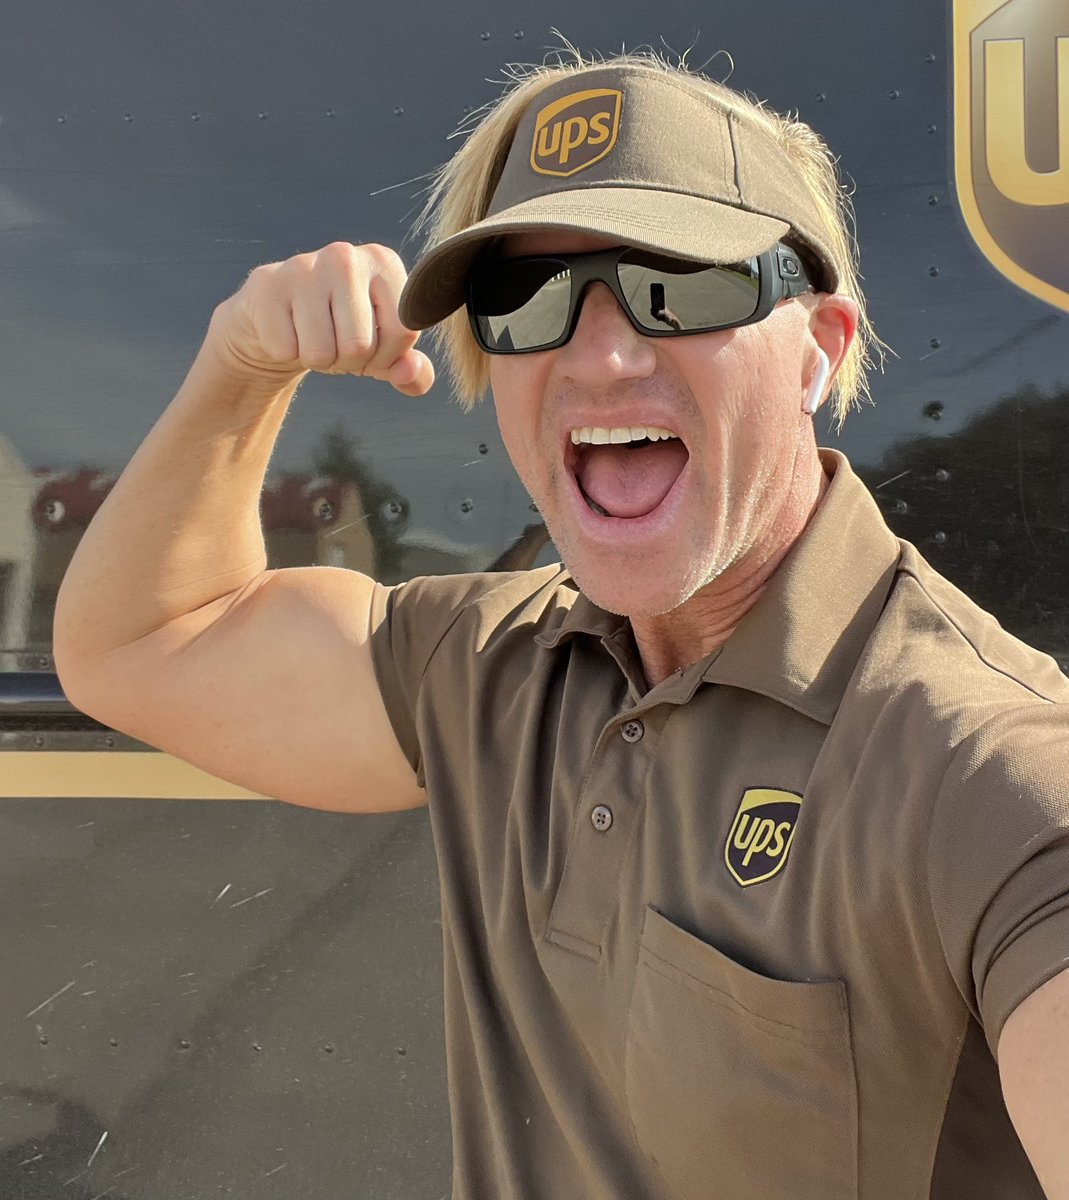 Monday complete!!!
Slammer just needs to make it through Friday and then Bro Slam will have 2 weeks of vacation!!! @UPS @UPSers @UPS_News @UPSjobs #UPS